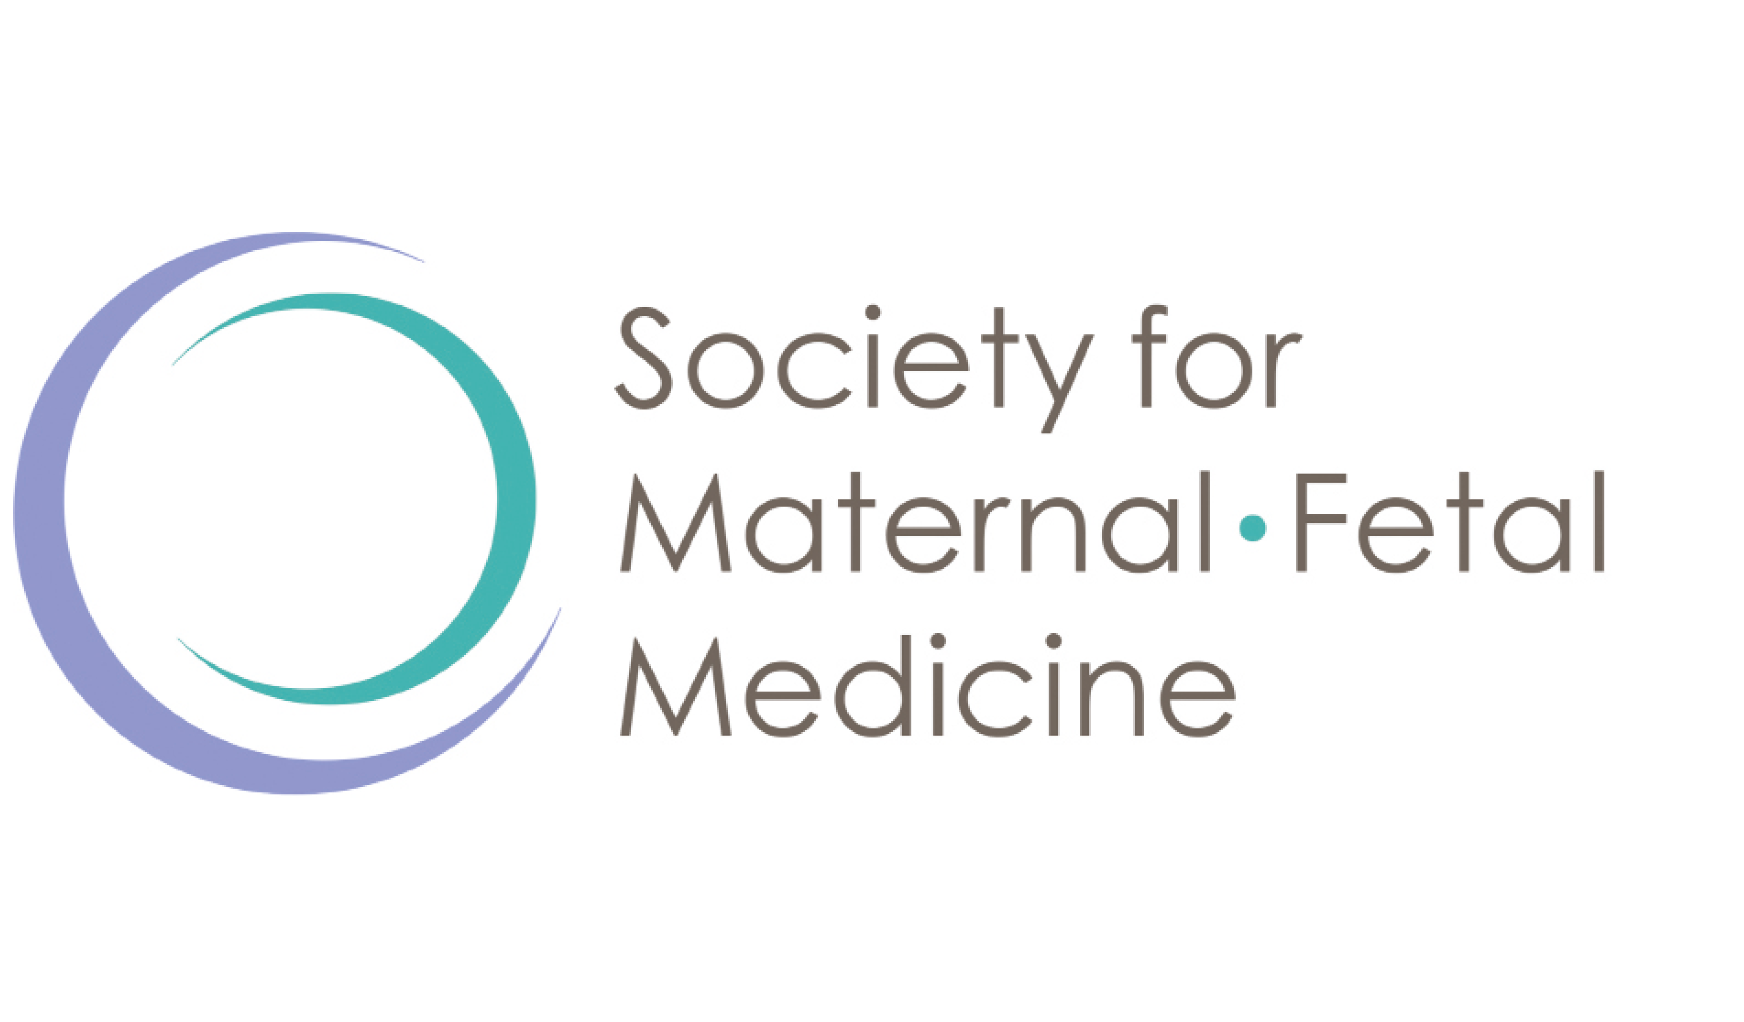 Society for Maternal-Fetal Medicine Consult Series #51: Thromboembolism prophylaxis for cesarean delivery